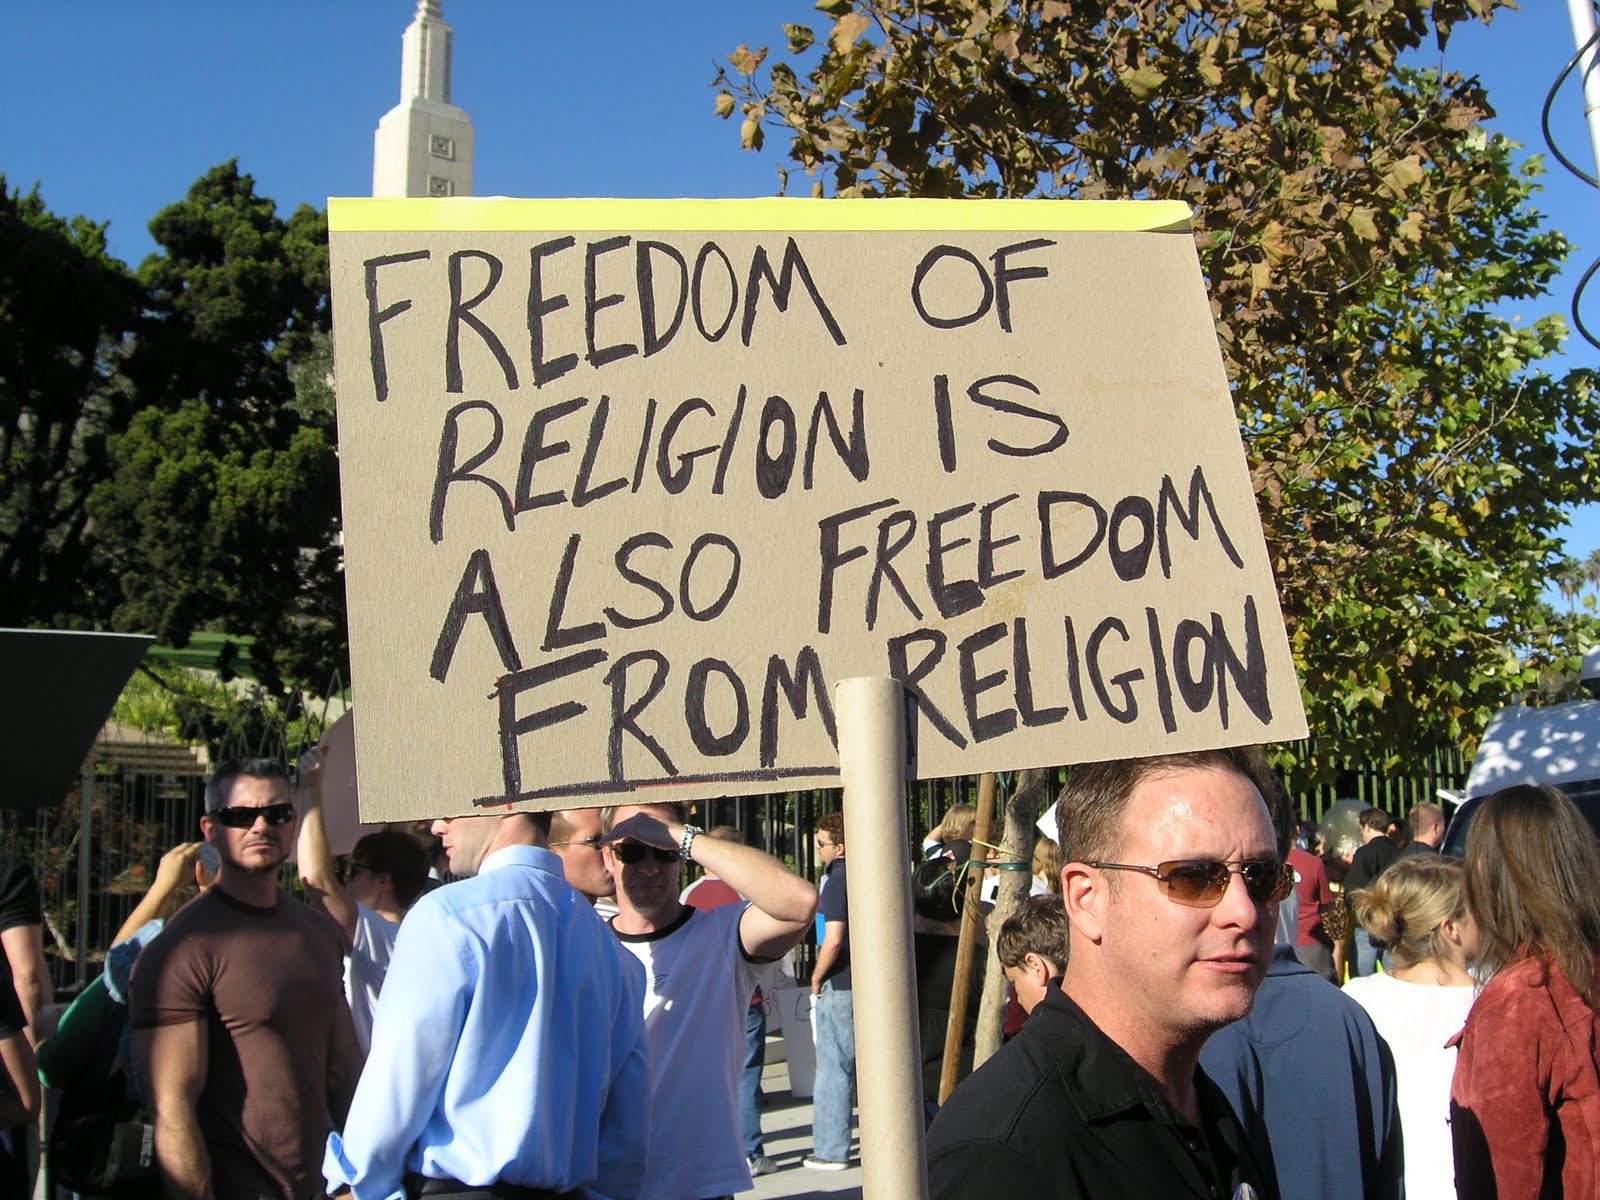 Freedom of religion is also freedom from religion separation church and state California proposition 8 protest mormon hypocrisy